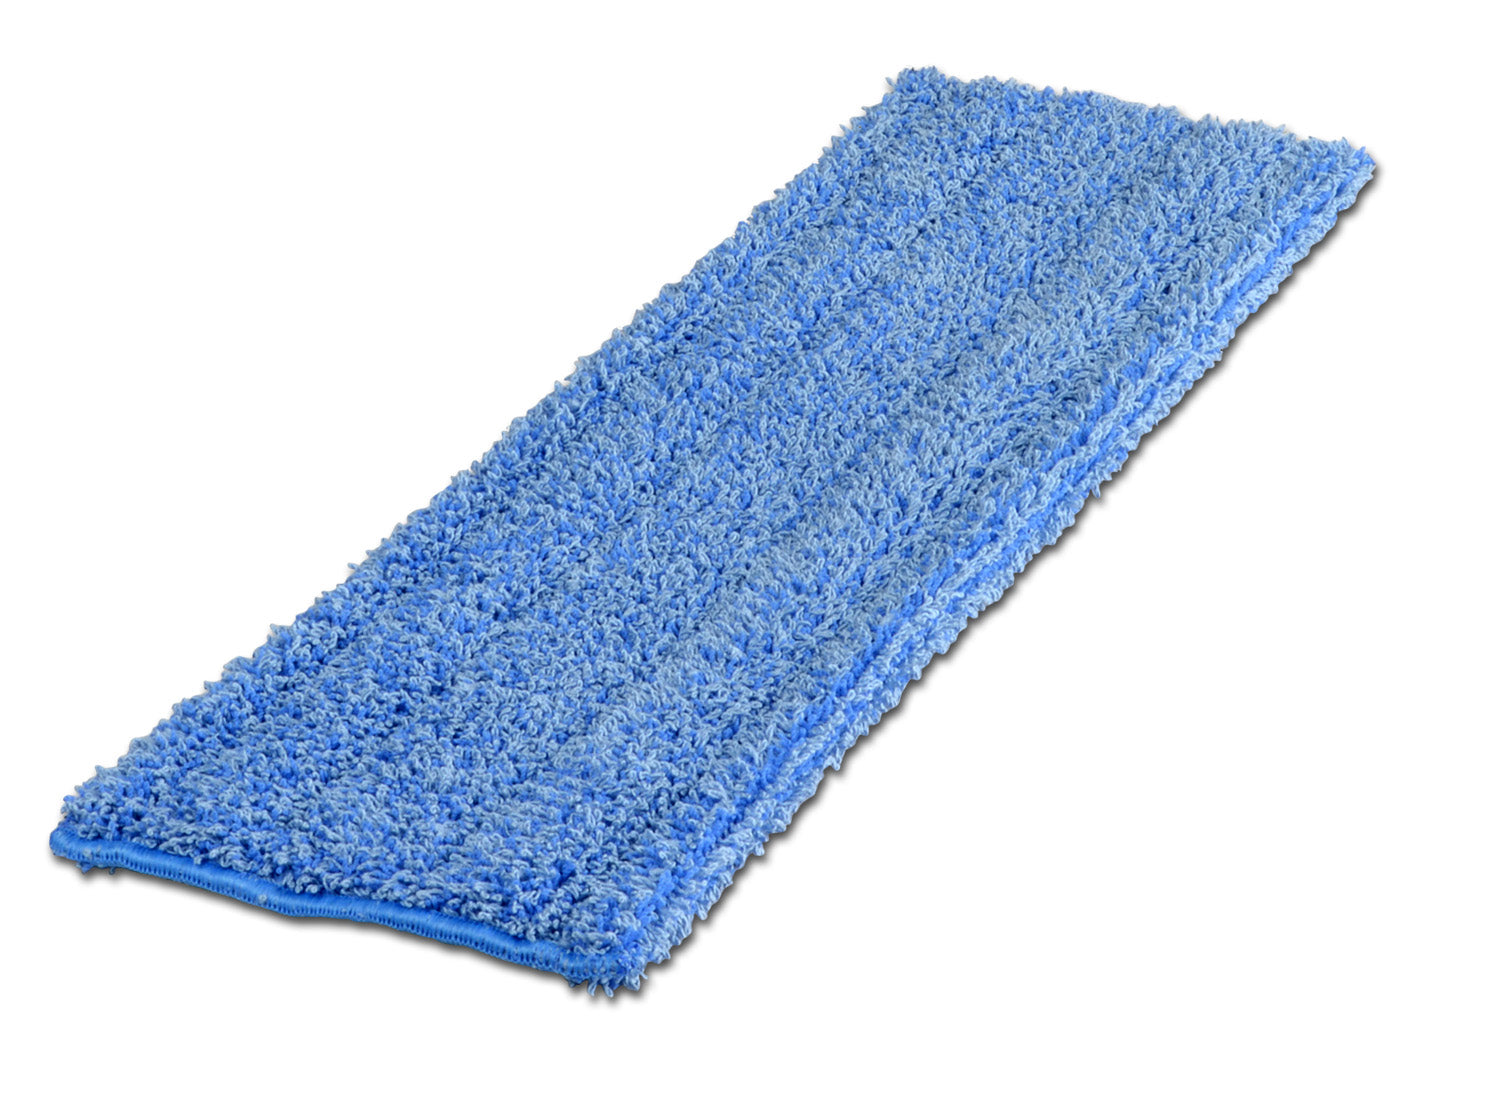 18 in. Microfiber Wet and Dry Flat Mop with 2-Piece Handle